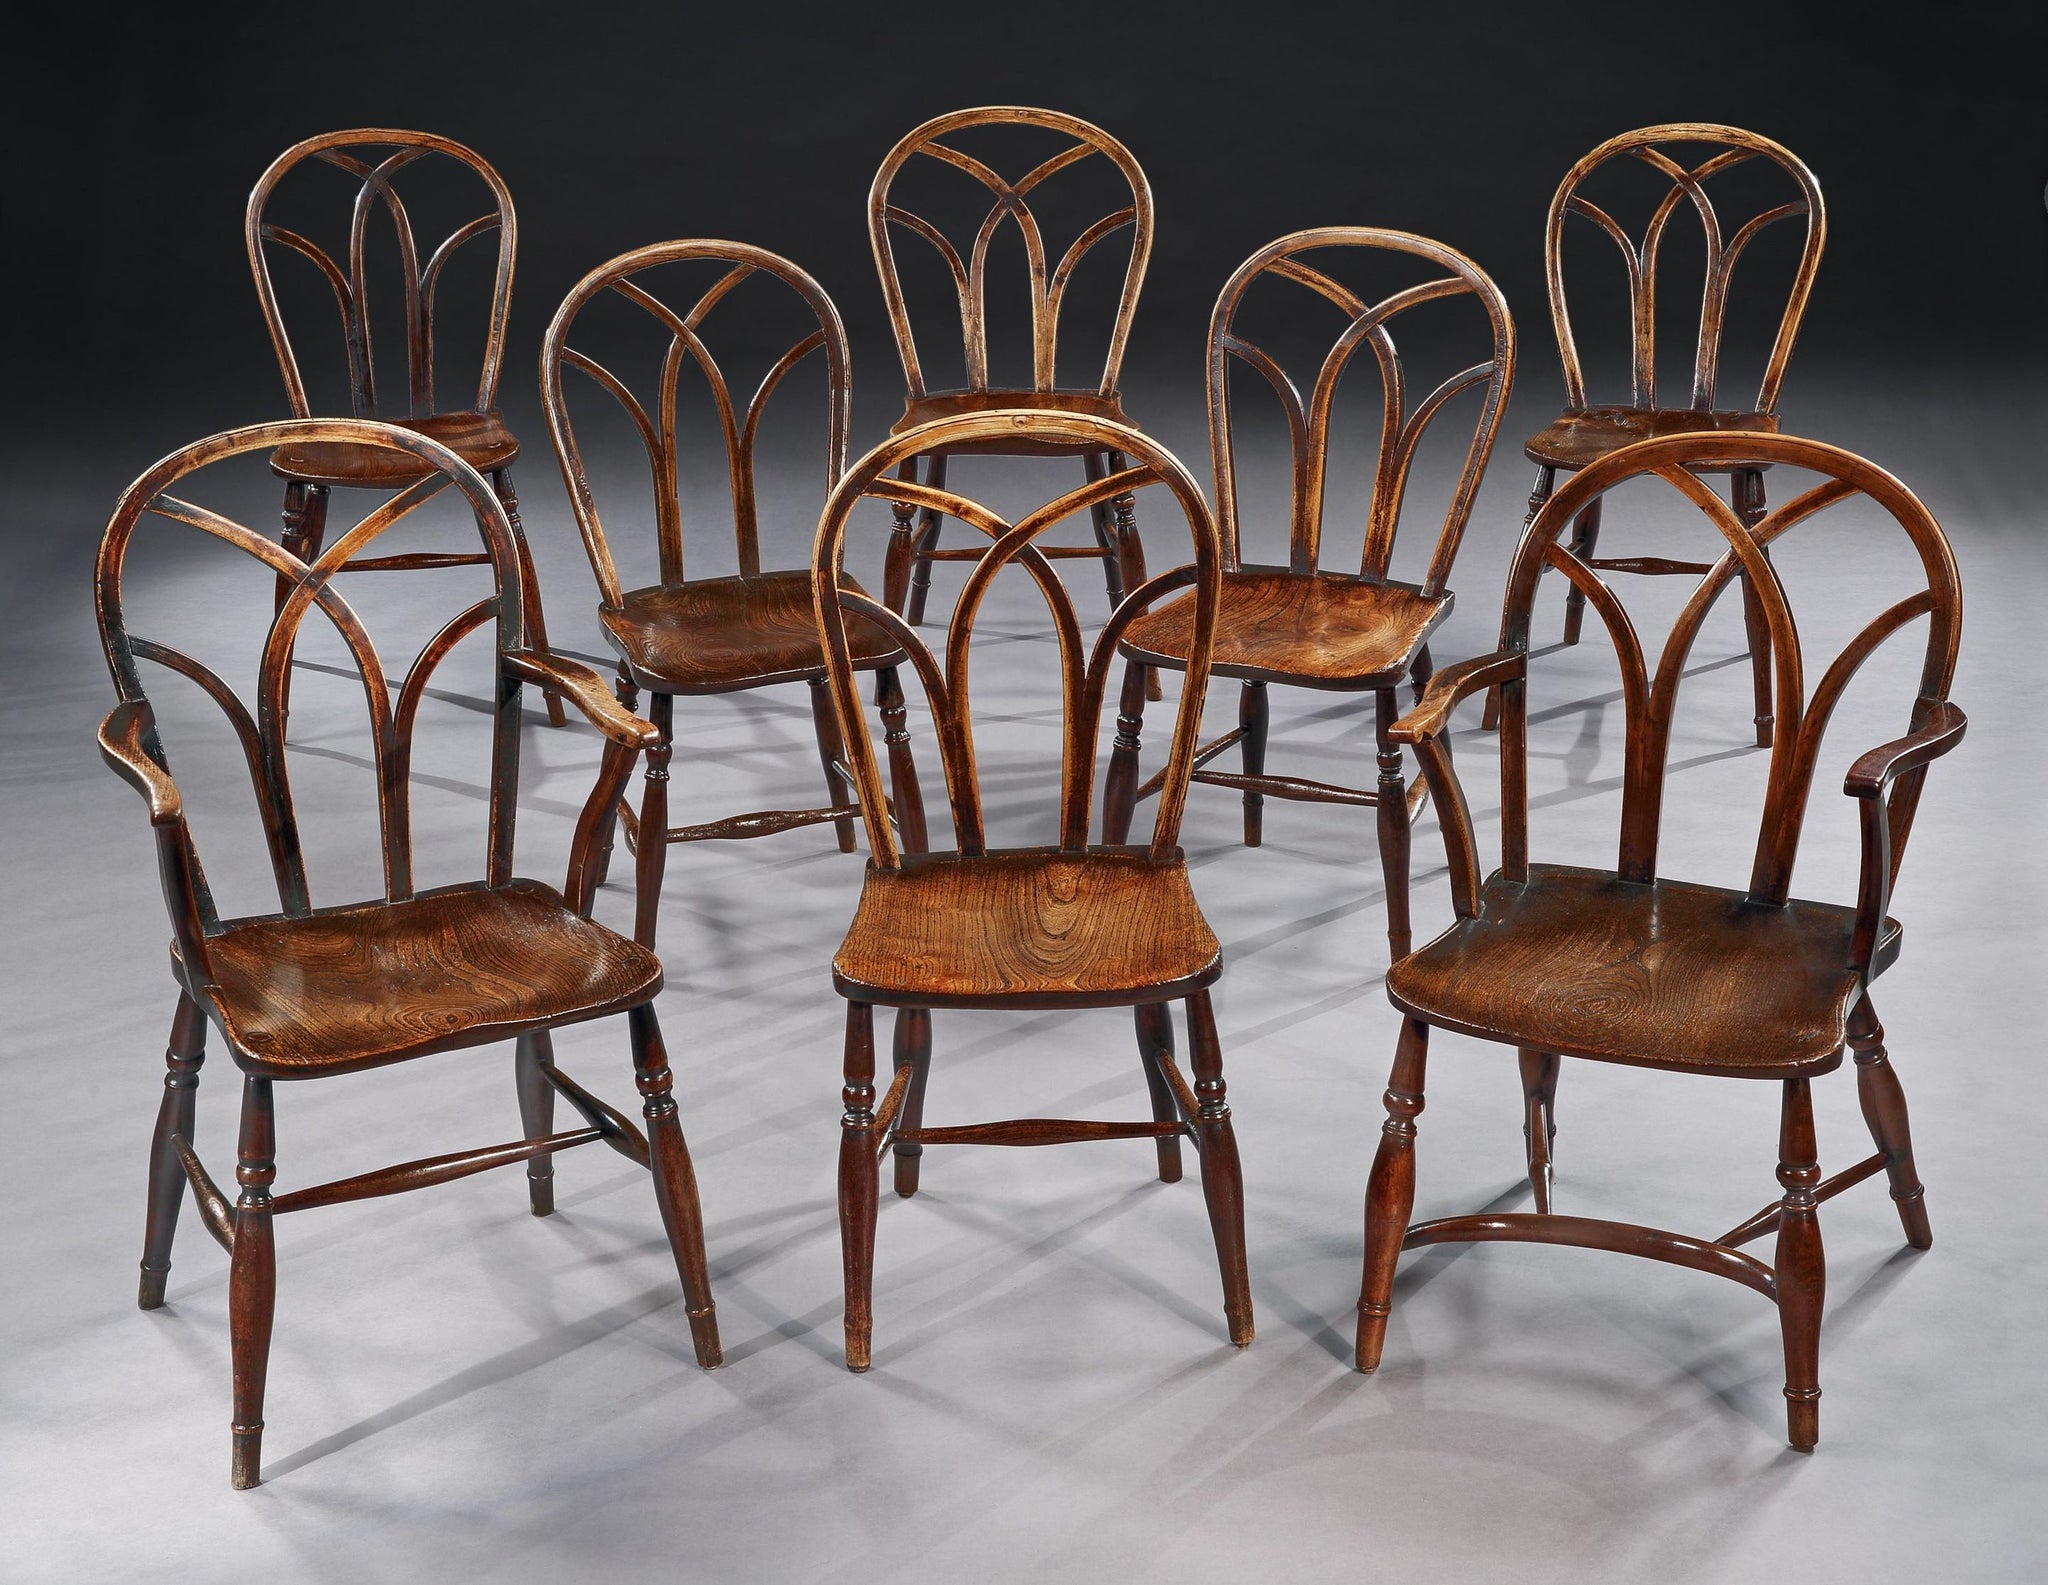 A Harlequin Set of Eight Gothic "Lace Back" Windsor Chairs